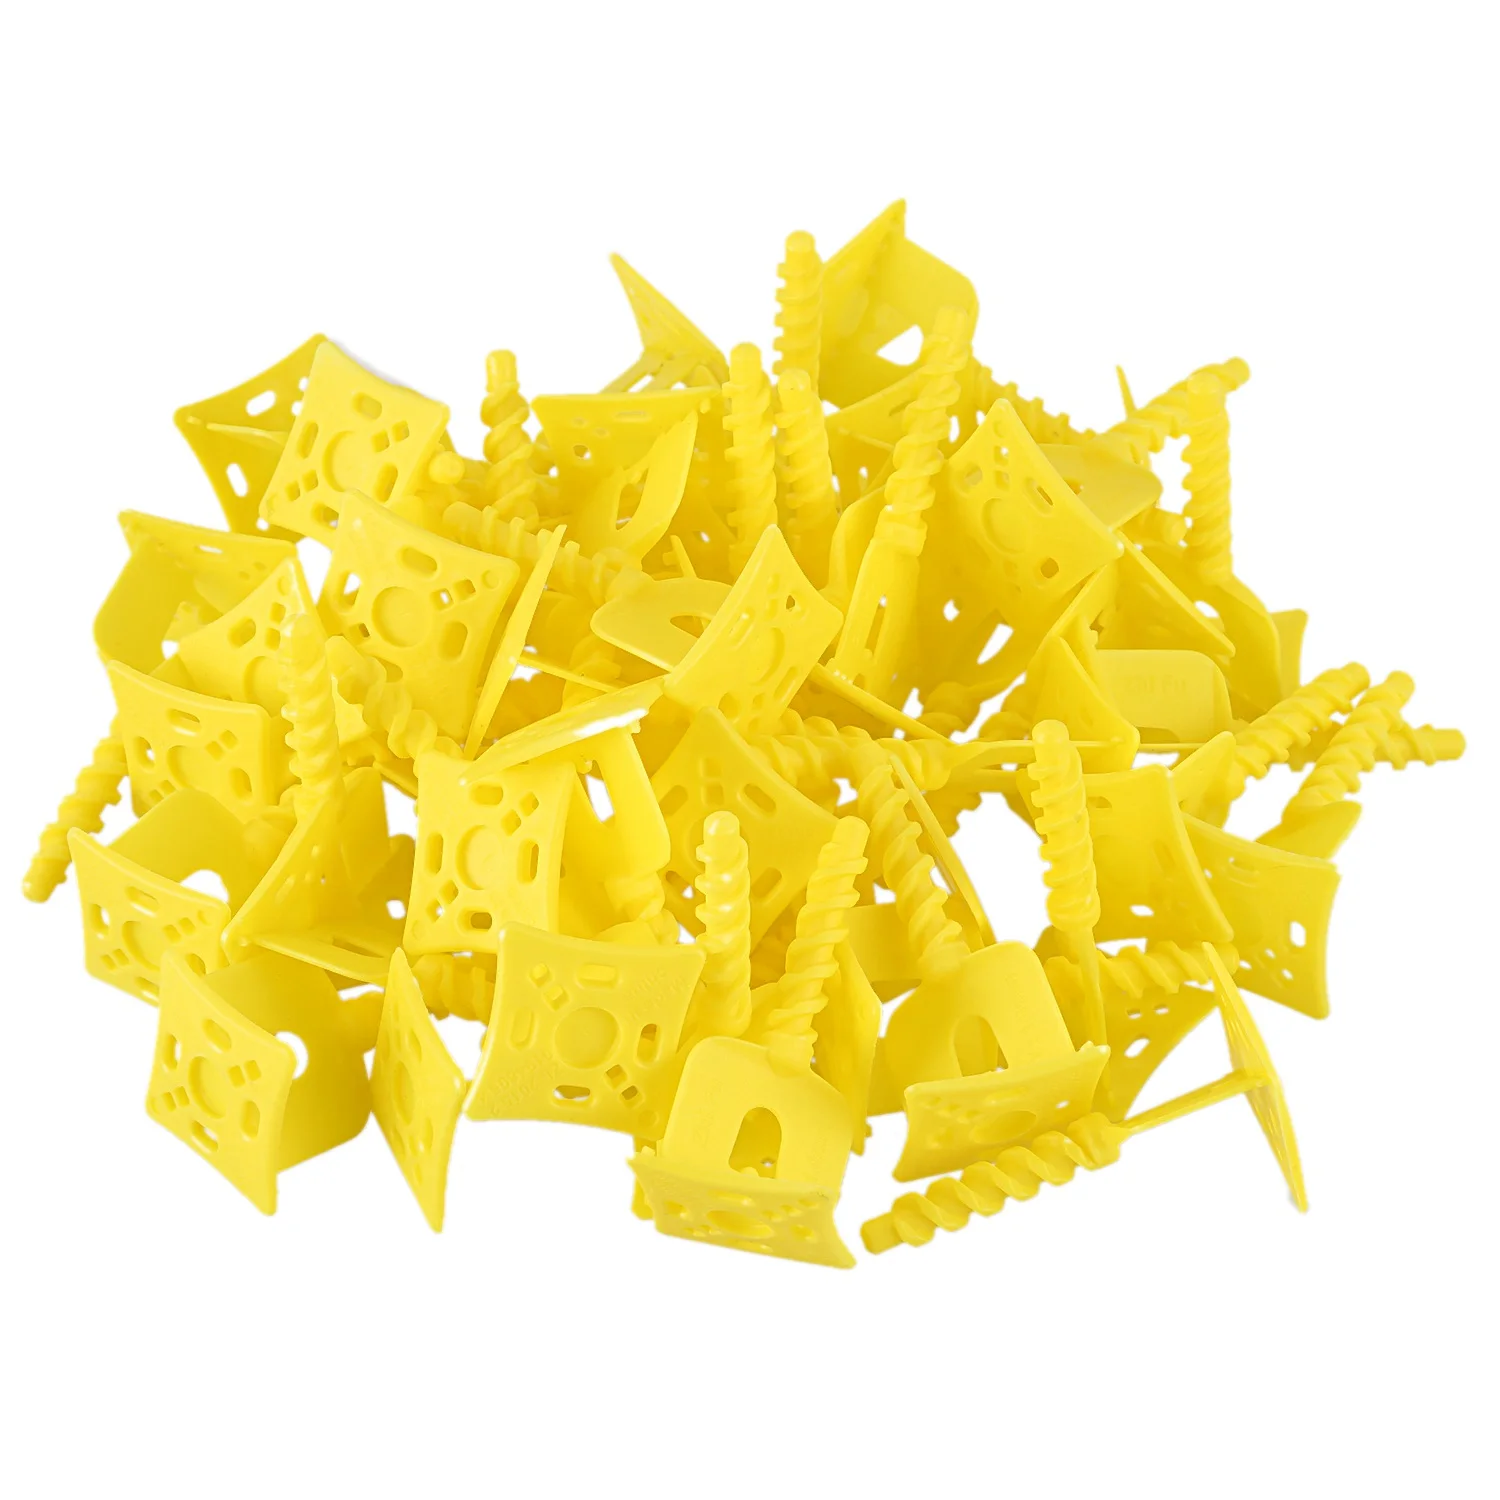 

Retail 50Pcs Plastic Ceramic Tools Spacers Tiling Alignment Floor Levelers Tile Leveling System Clips 1Mm For Flooring Tiles